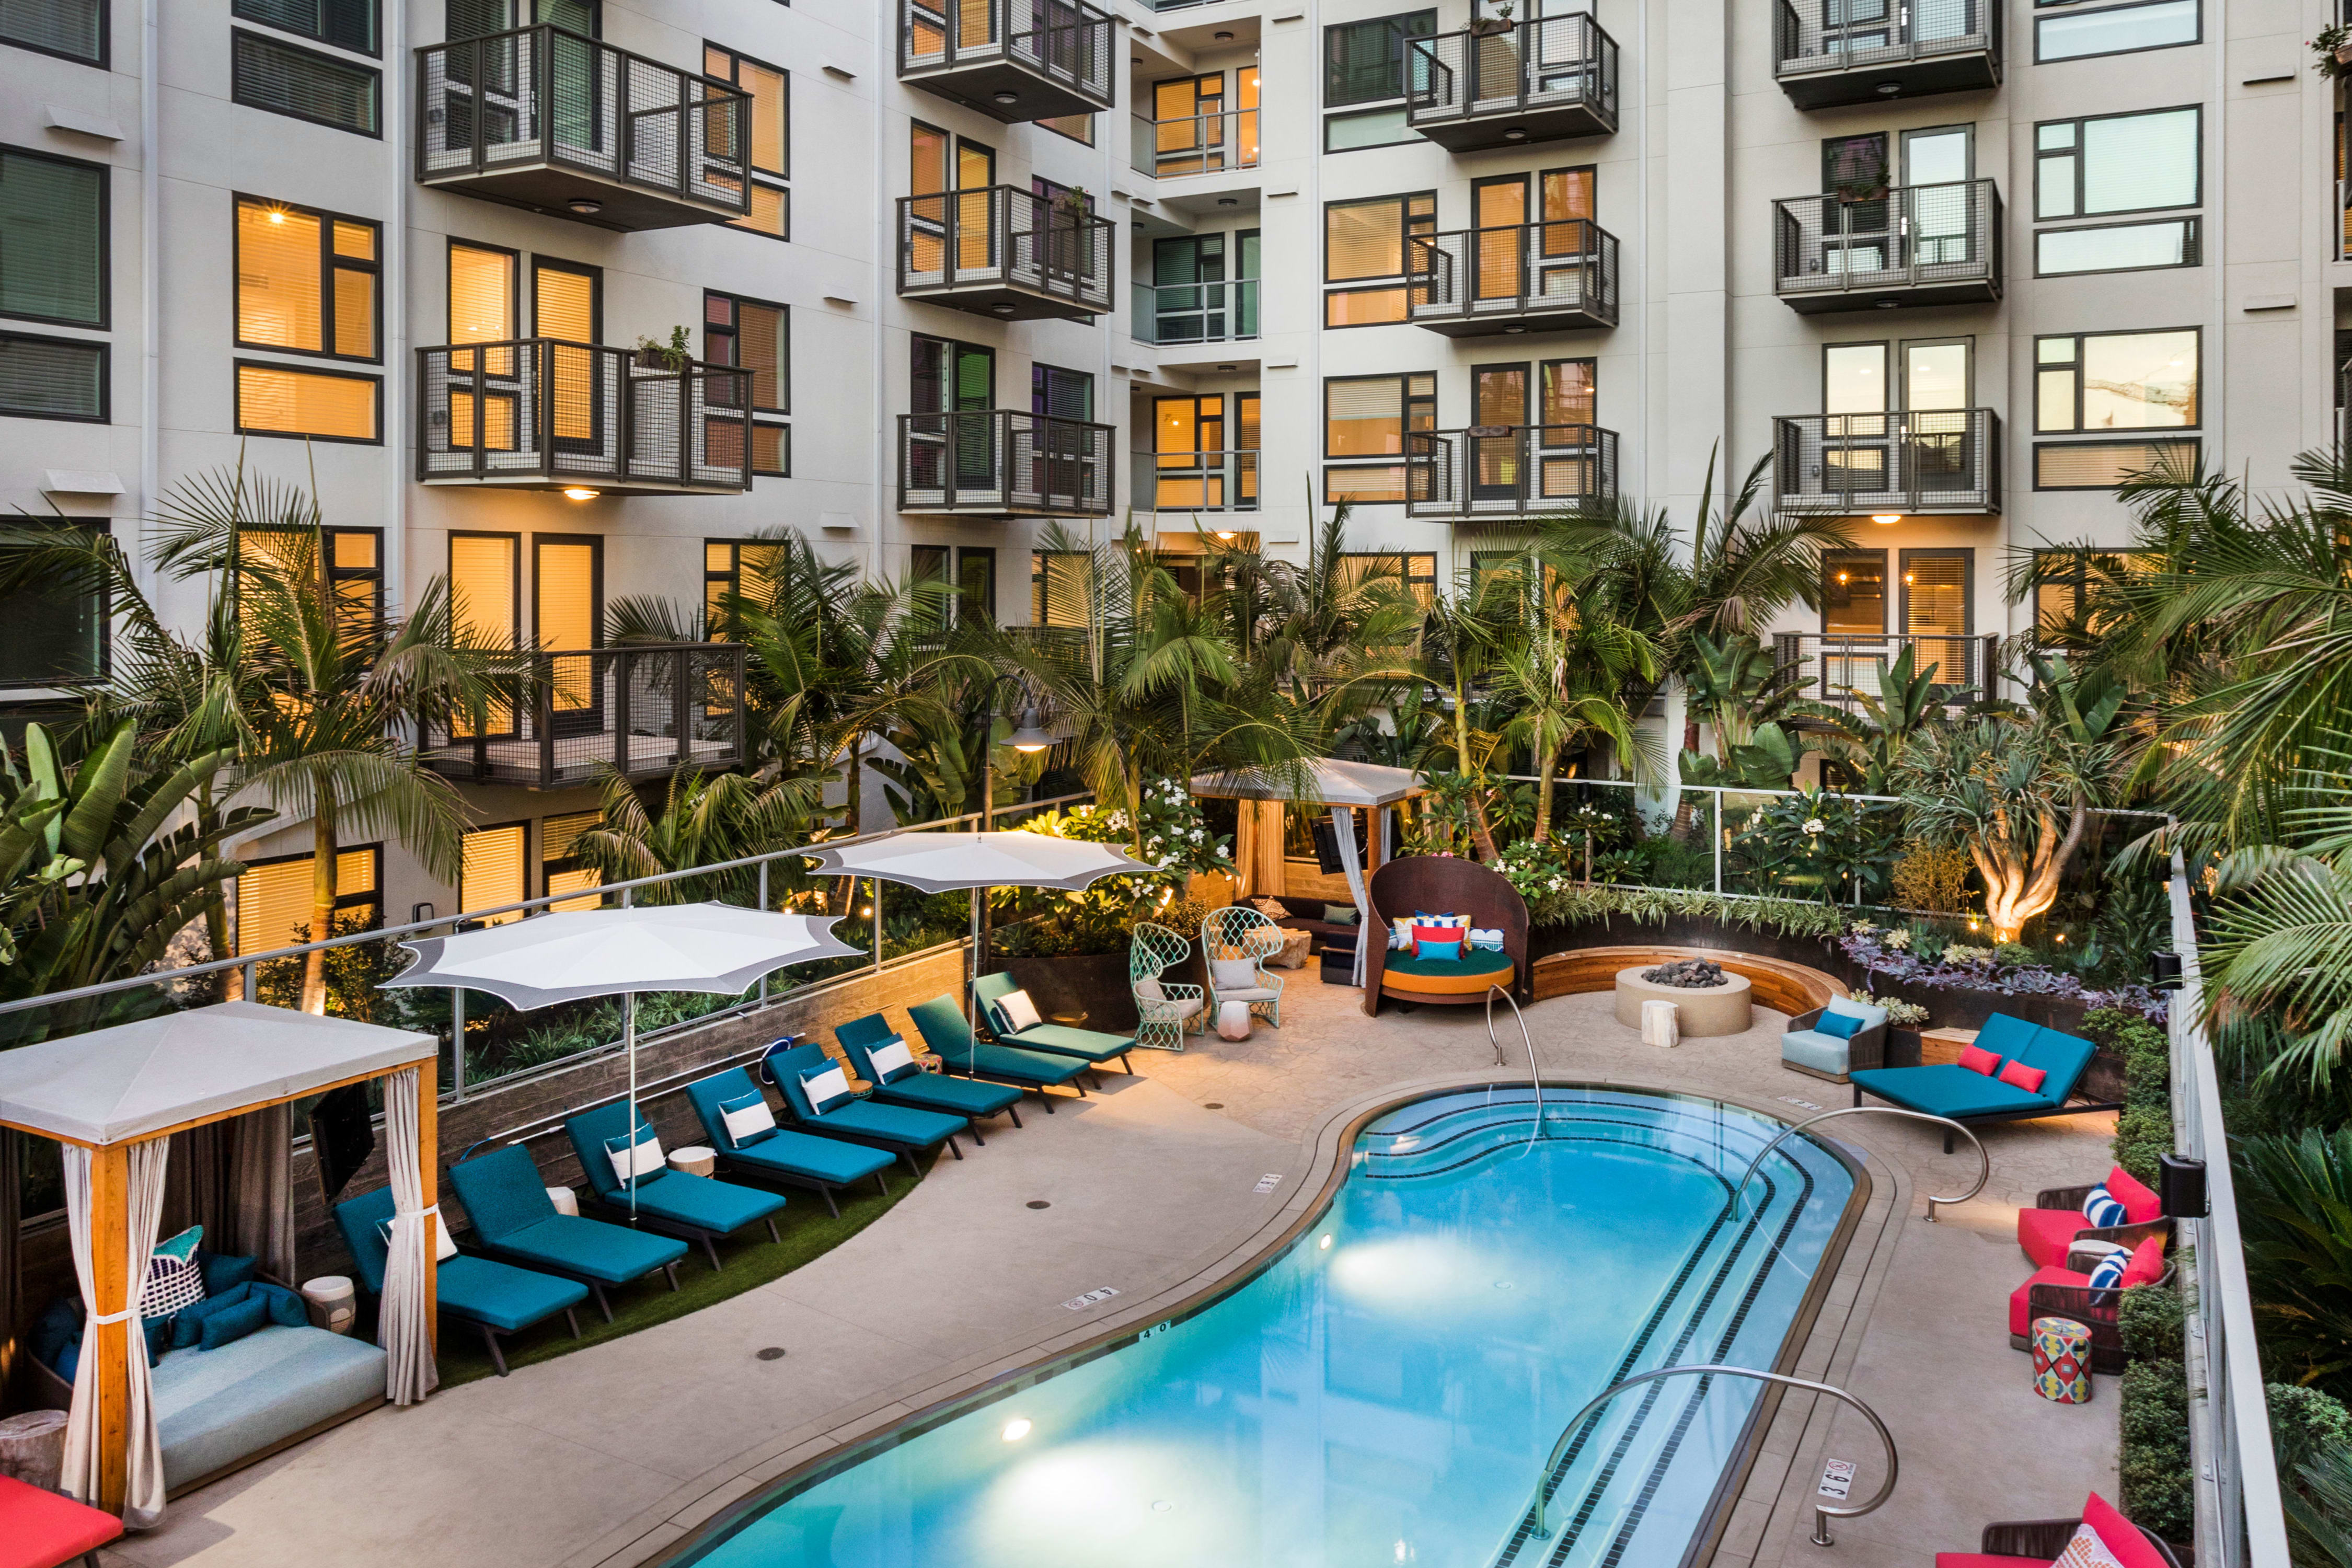 Gorgeous pool surrounded by our apartment homes at The Artisan in San Diego, California